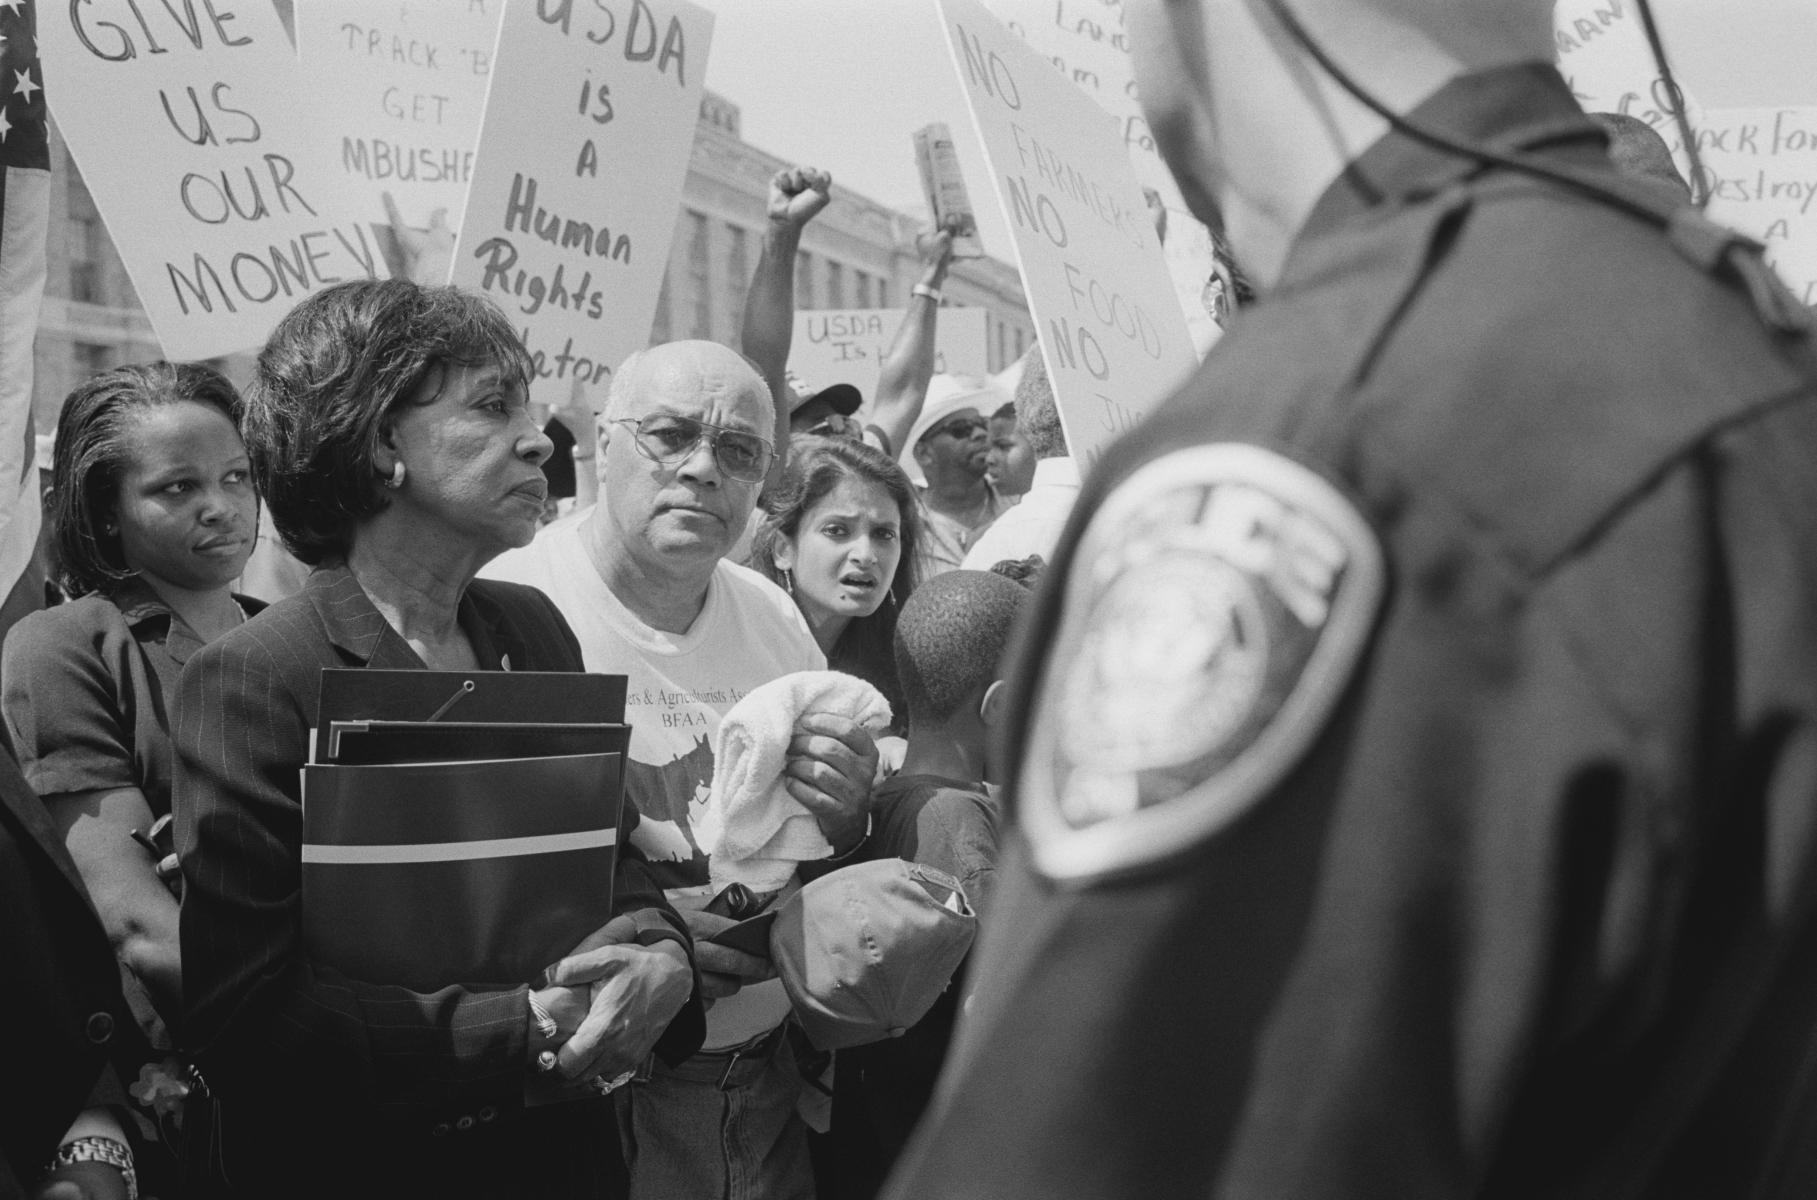 <p><center>Washington, D.C.:</center></p>
Congresswoman Maxine Waters and Gary Grant, President of the Black Farmers and Agriculturists Assn., lead a demonstration at the entrance of the USDA. Secretary Dan Glickman eventually agreed to their demand that he speak with them, meeting a small delegation who spoke on behalf of black farmers. : Images : AMERICAN BLACK FARMERS PROJECT - John Ficara